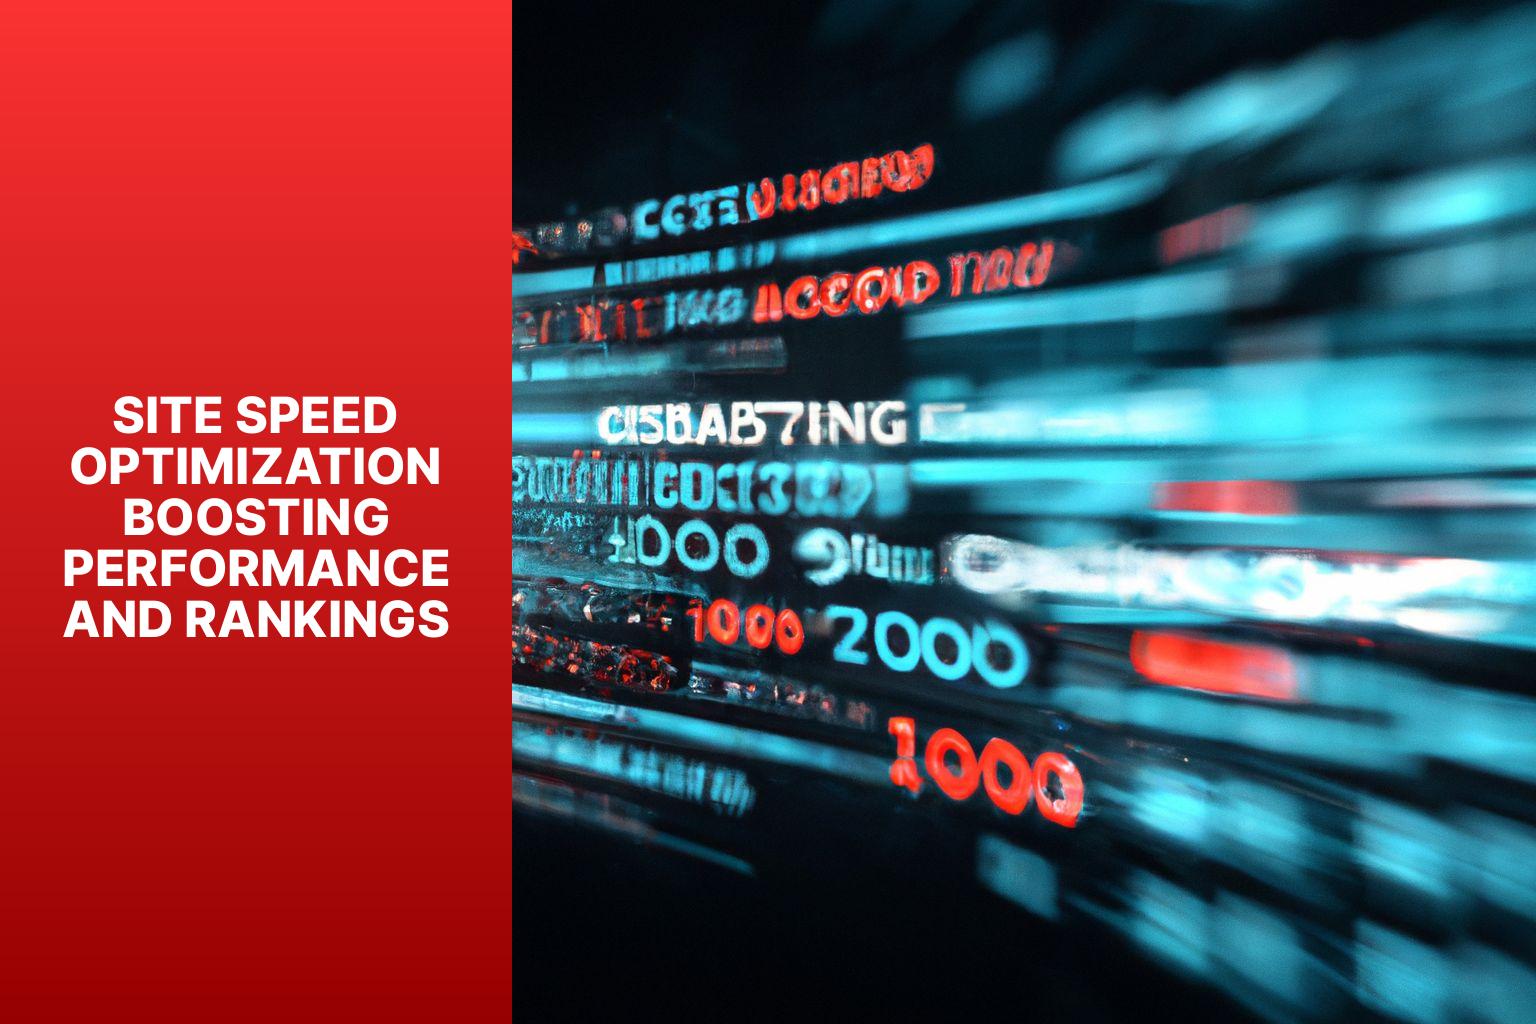 Site Speed Optimization Boosting Performance and Rankings